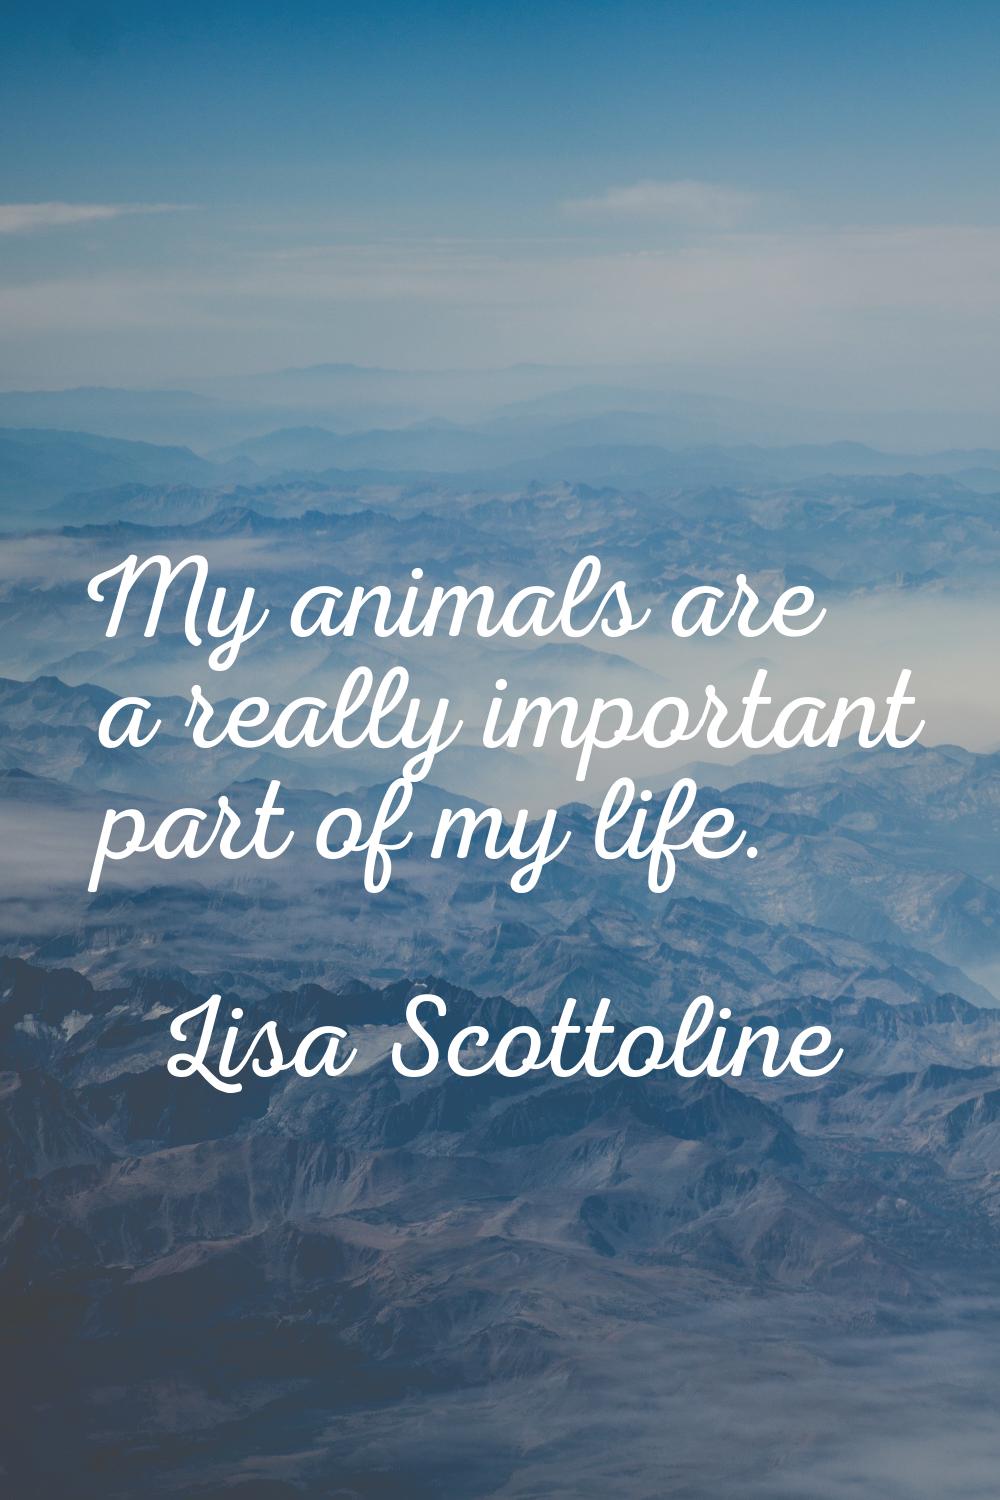 My animals are a really important part of my life.